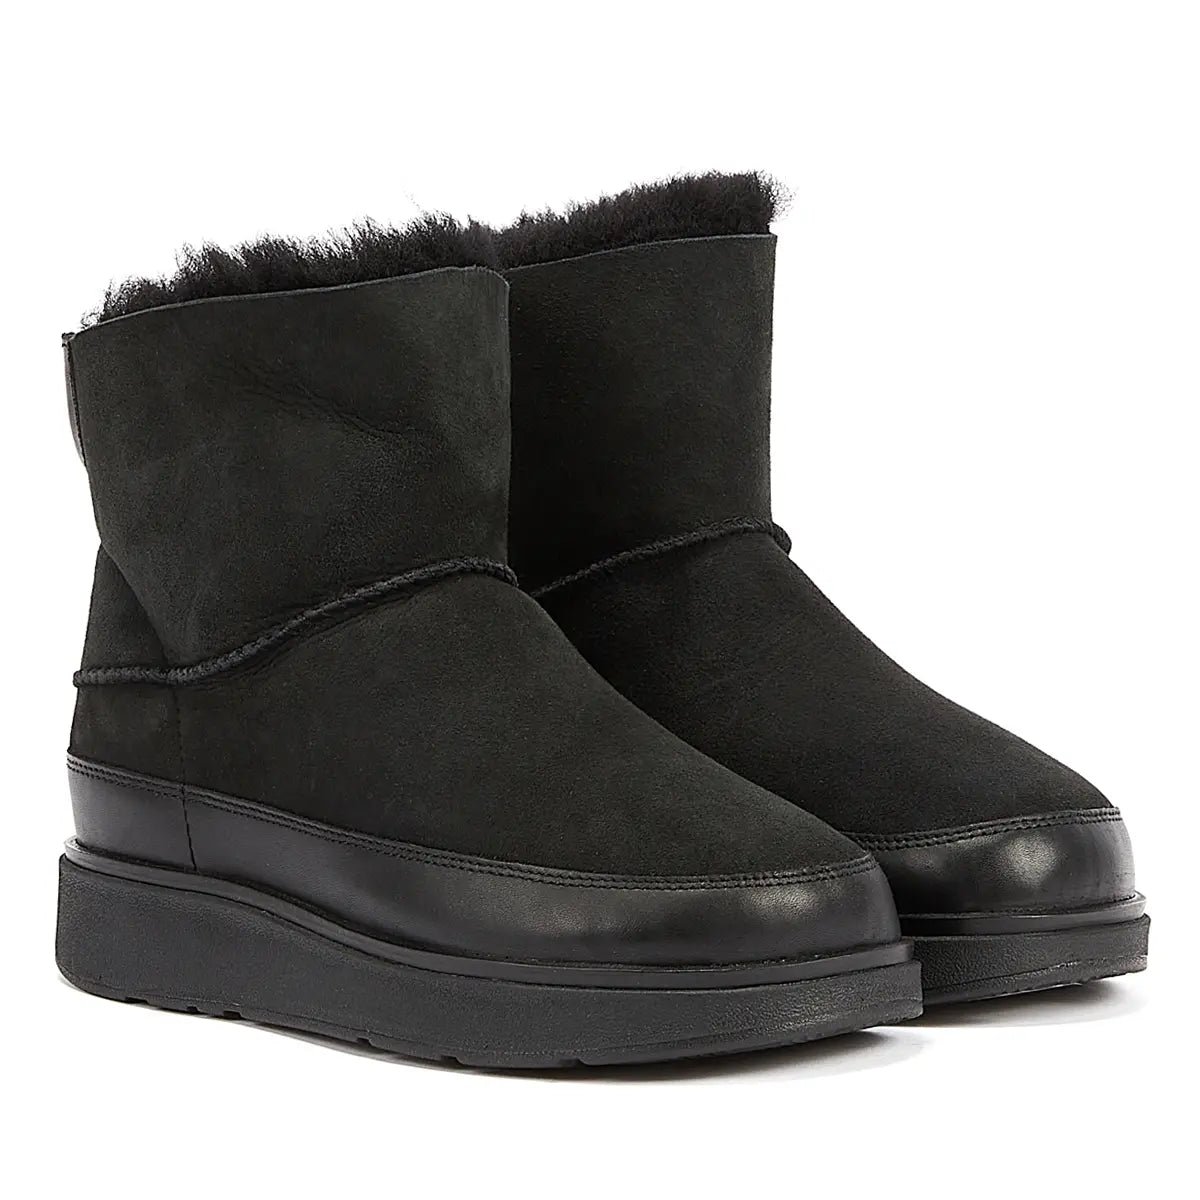 Fitflop Shearling Women’s Black Boots